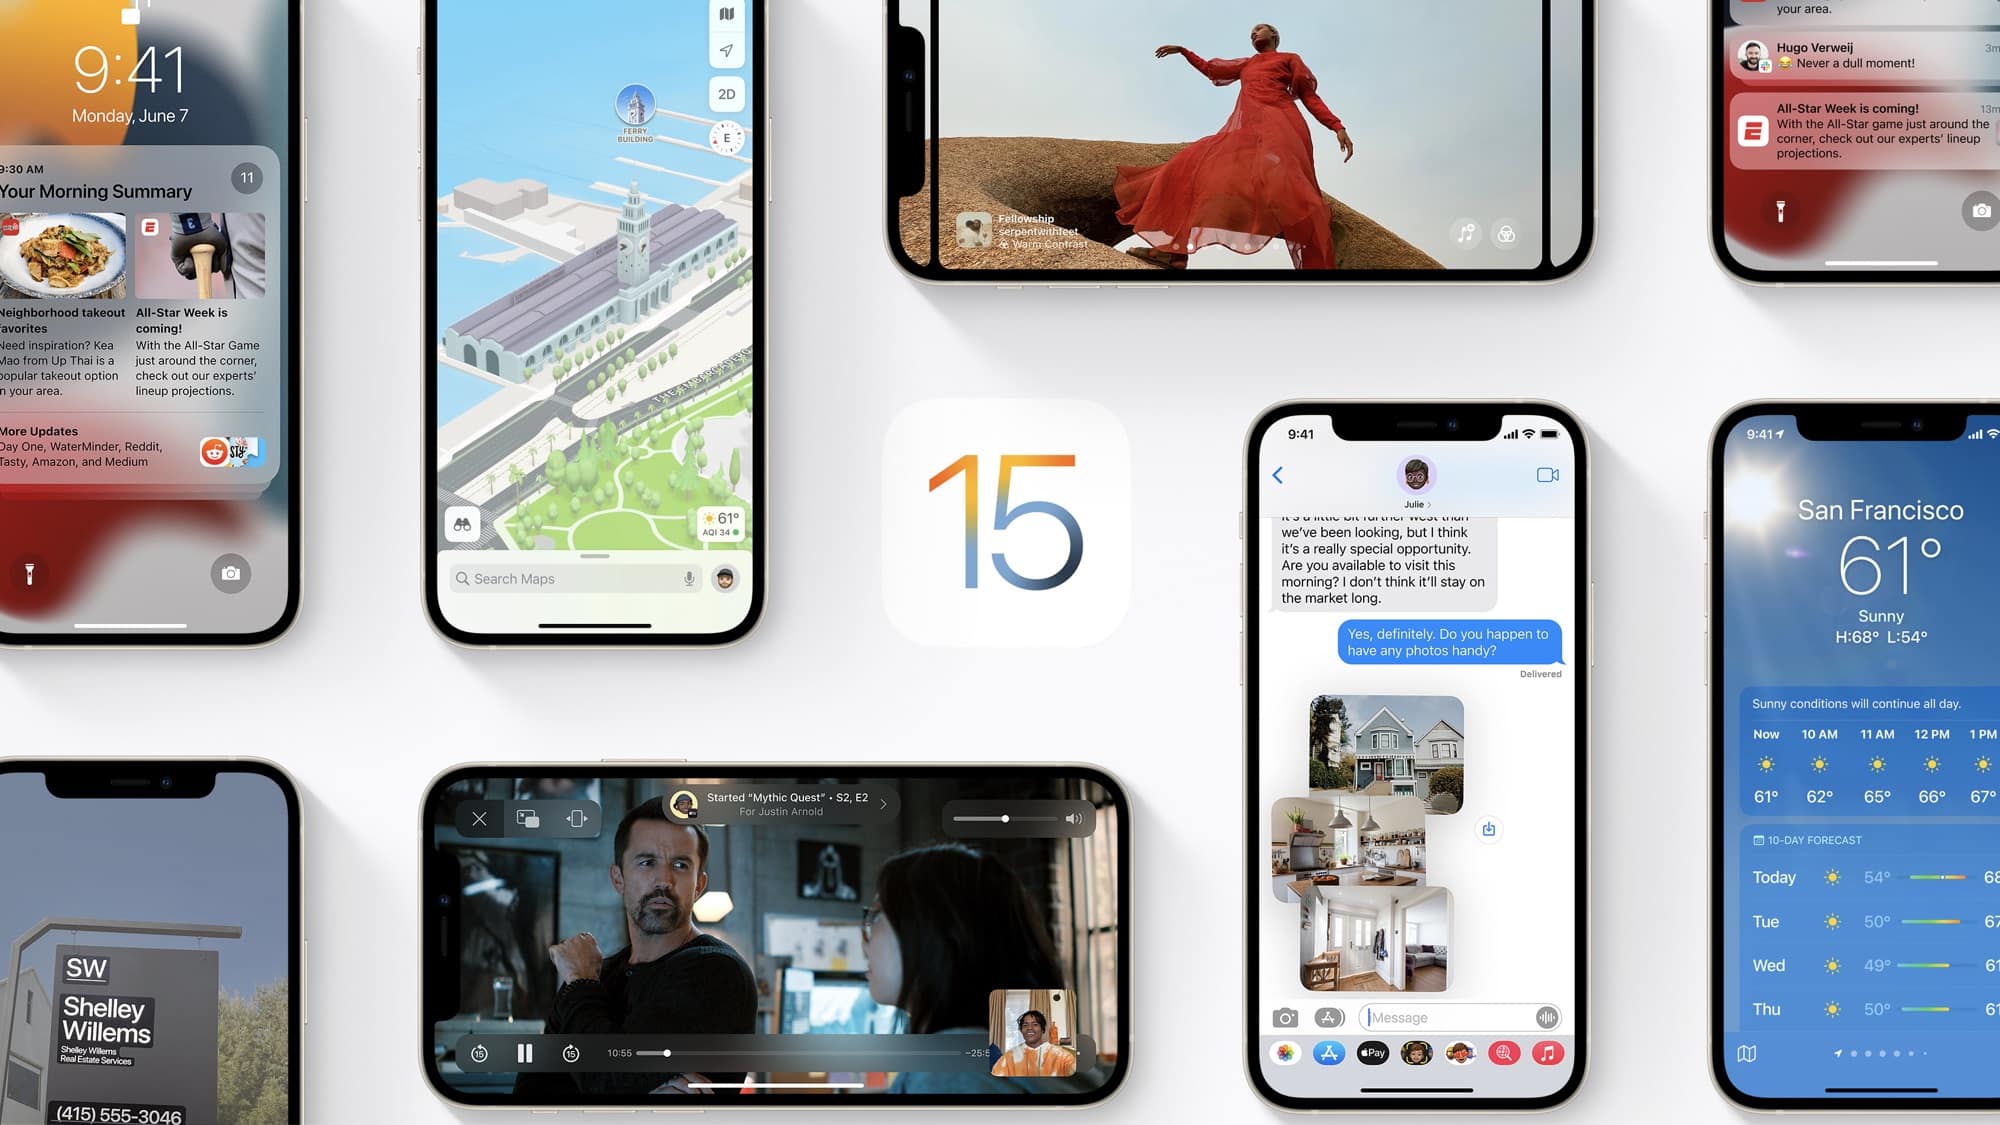 Apple unveils iOS 15: Updates to FaceTime, Wallet, Focus, and Maps